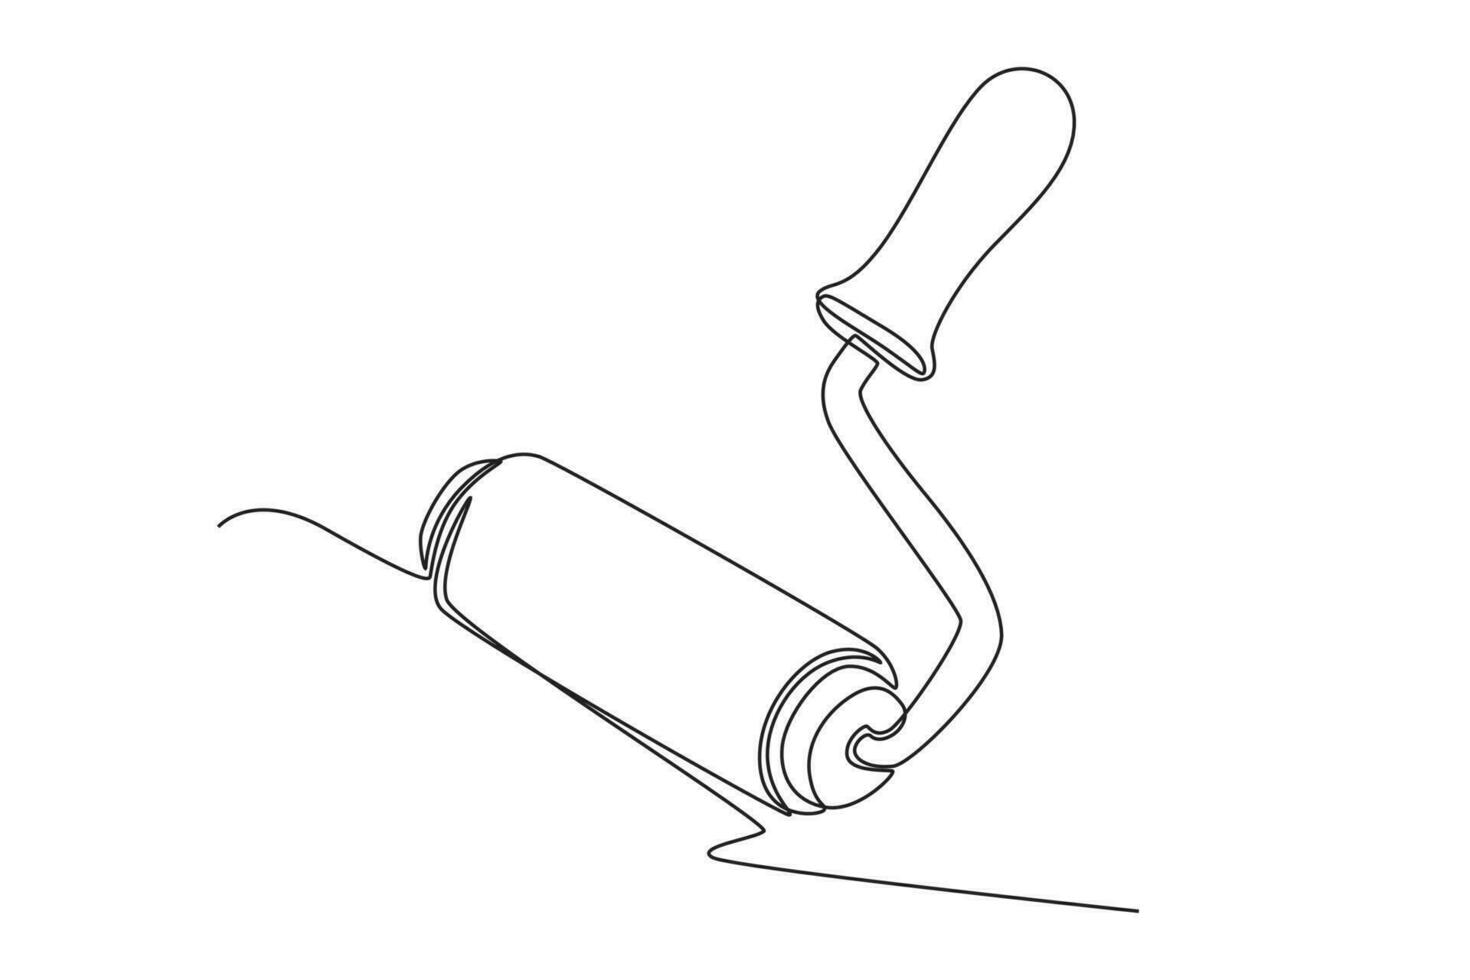 Continuous one line drawing construction tools concept. Single line draw design vector graphic illustration.